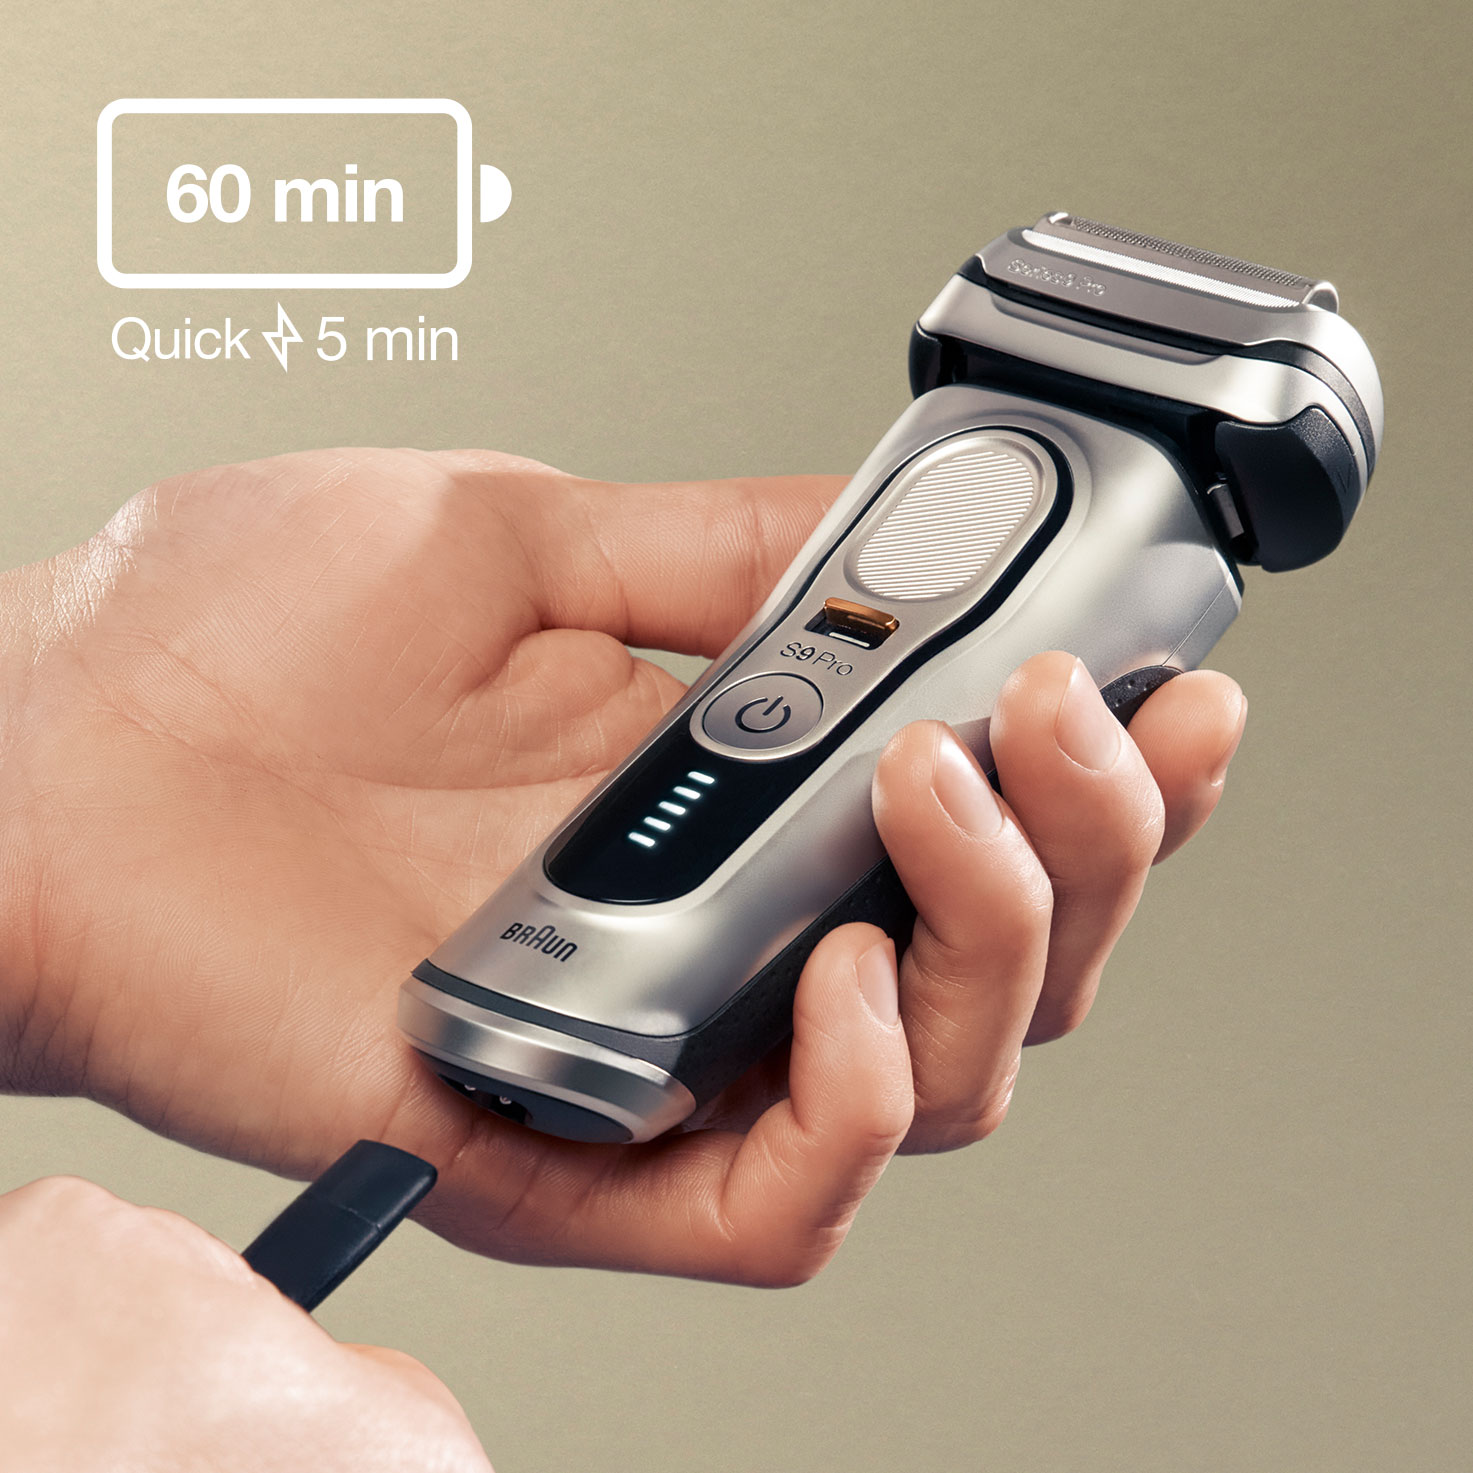 Series 9 Pro 9467cc Wet & Dry shaver with SmartCare center and 